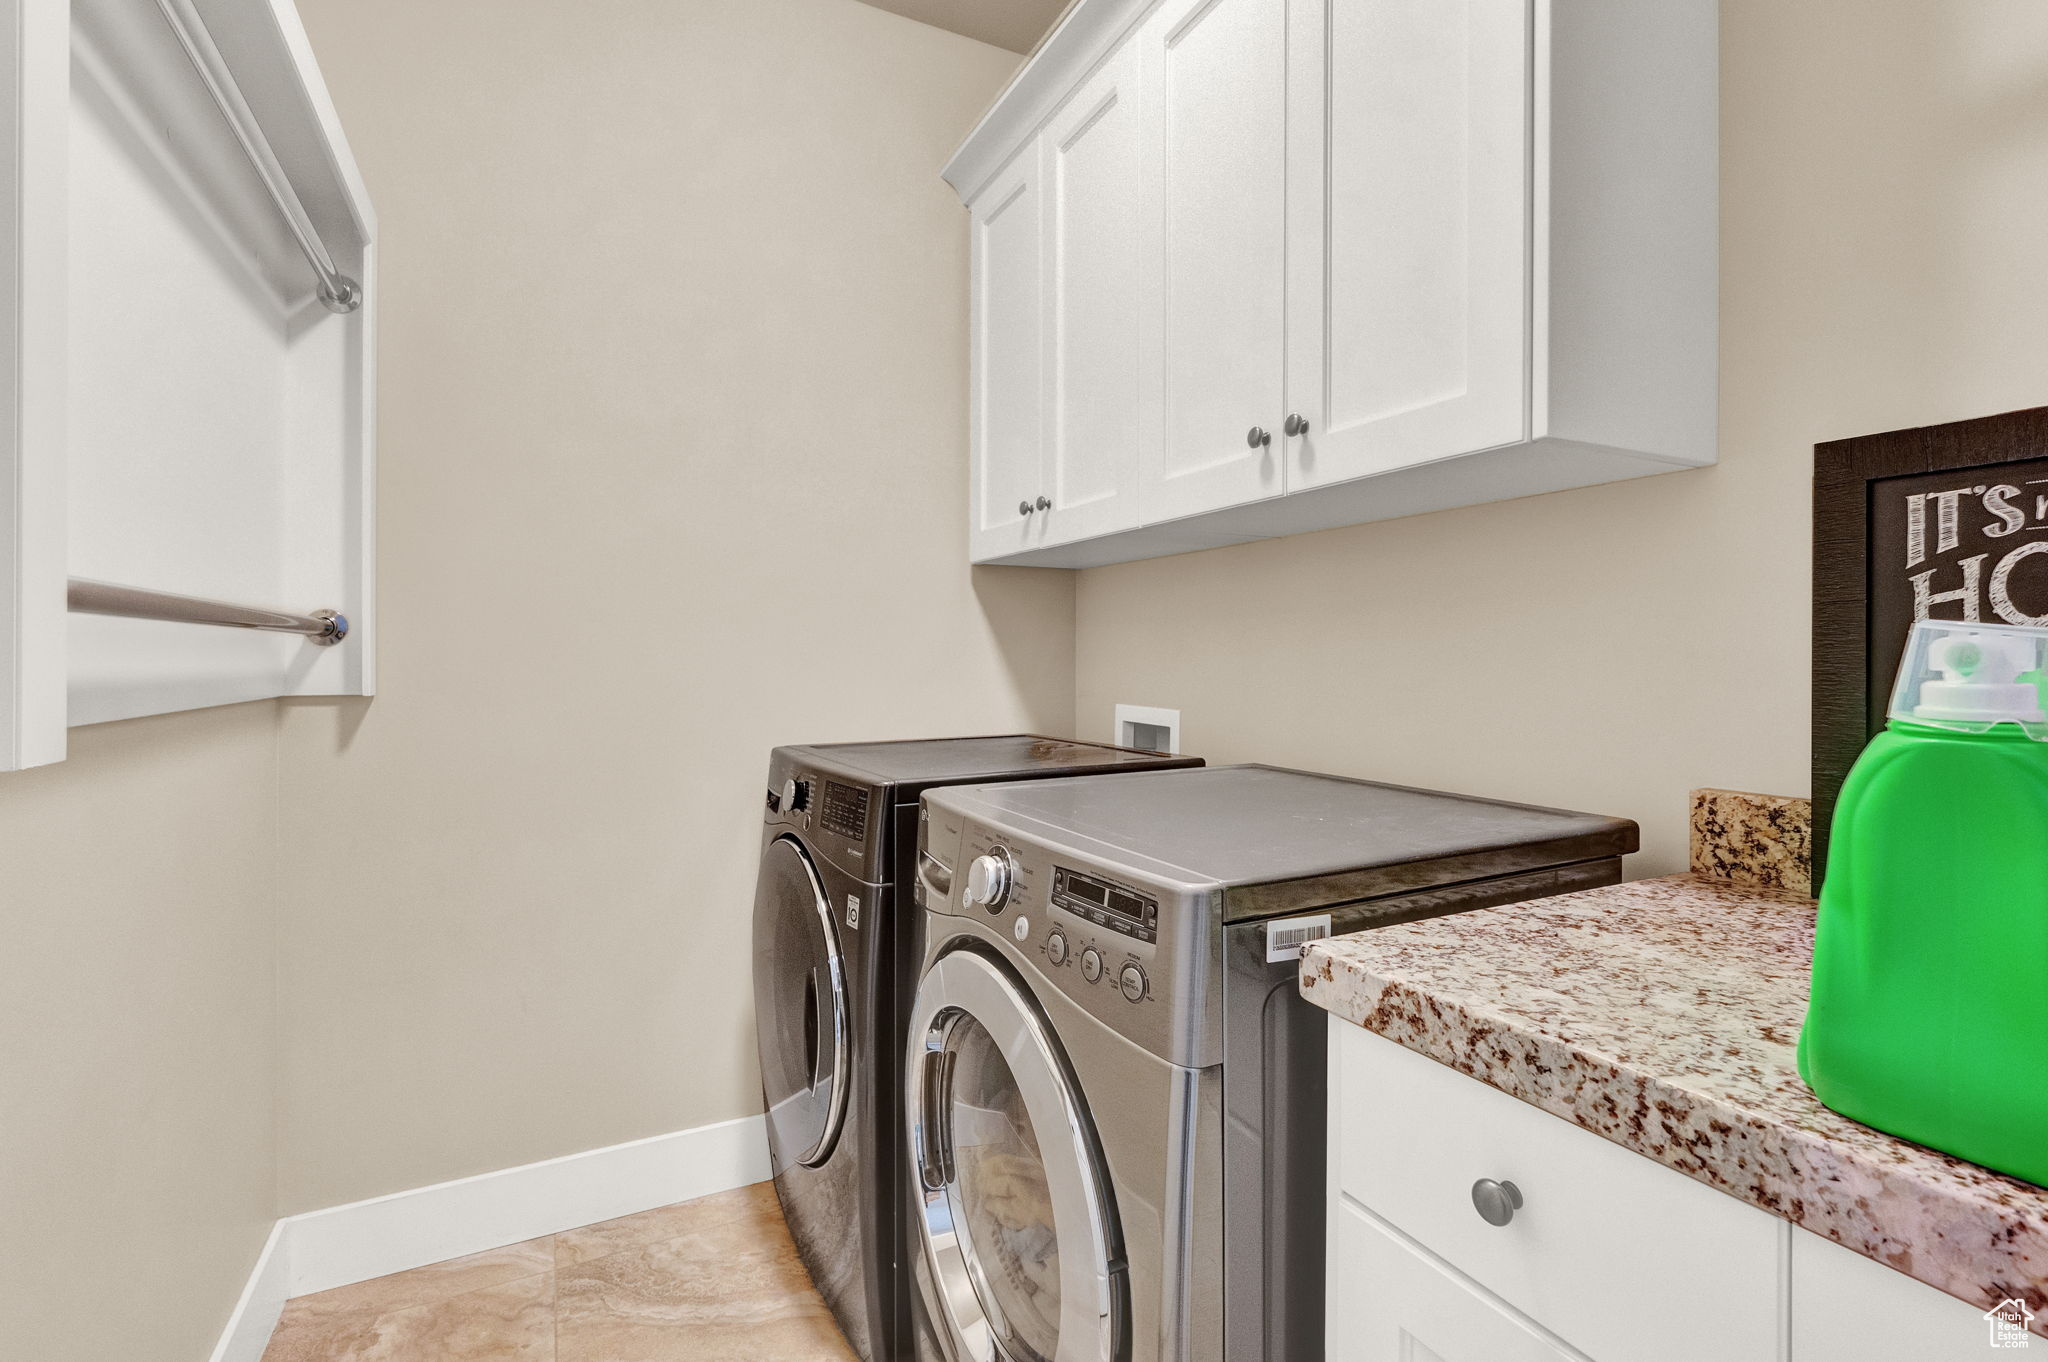 Laundry room featuring hookup for a washing machine, light tile floors, cabinets, and washer and clothes dryer